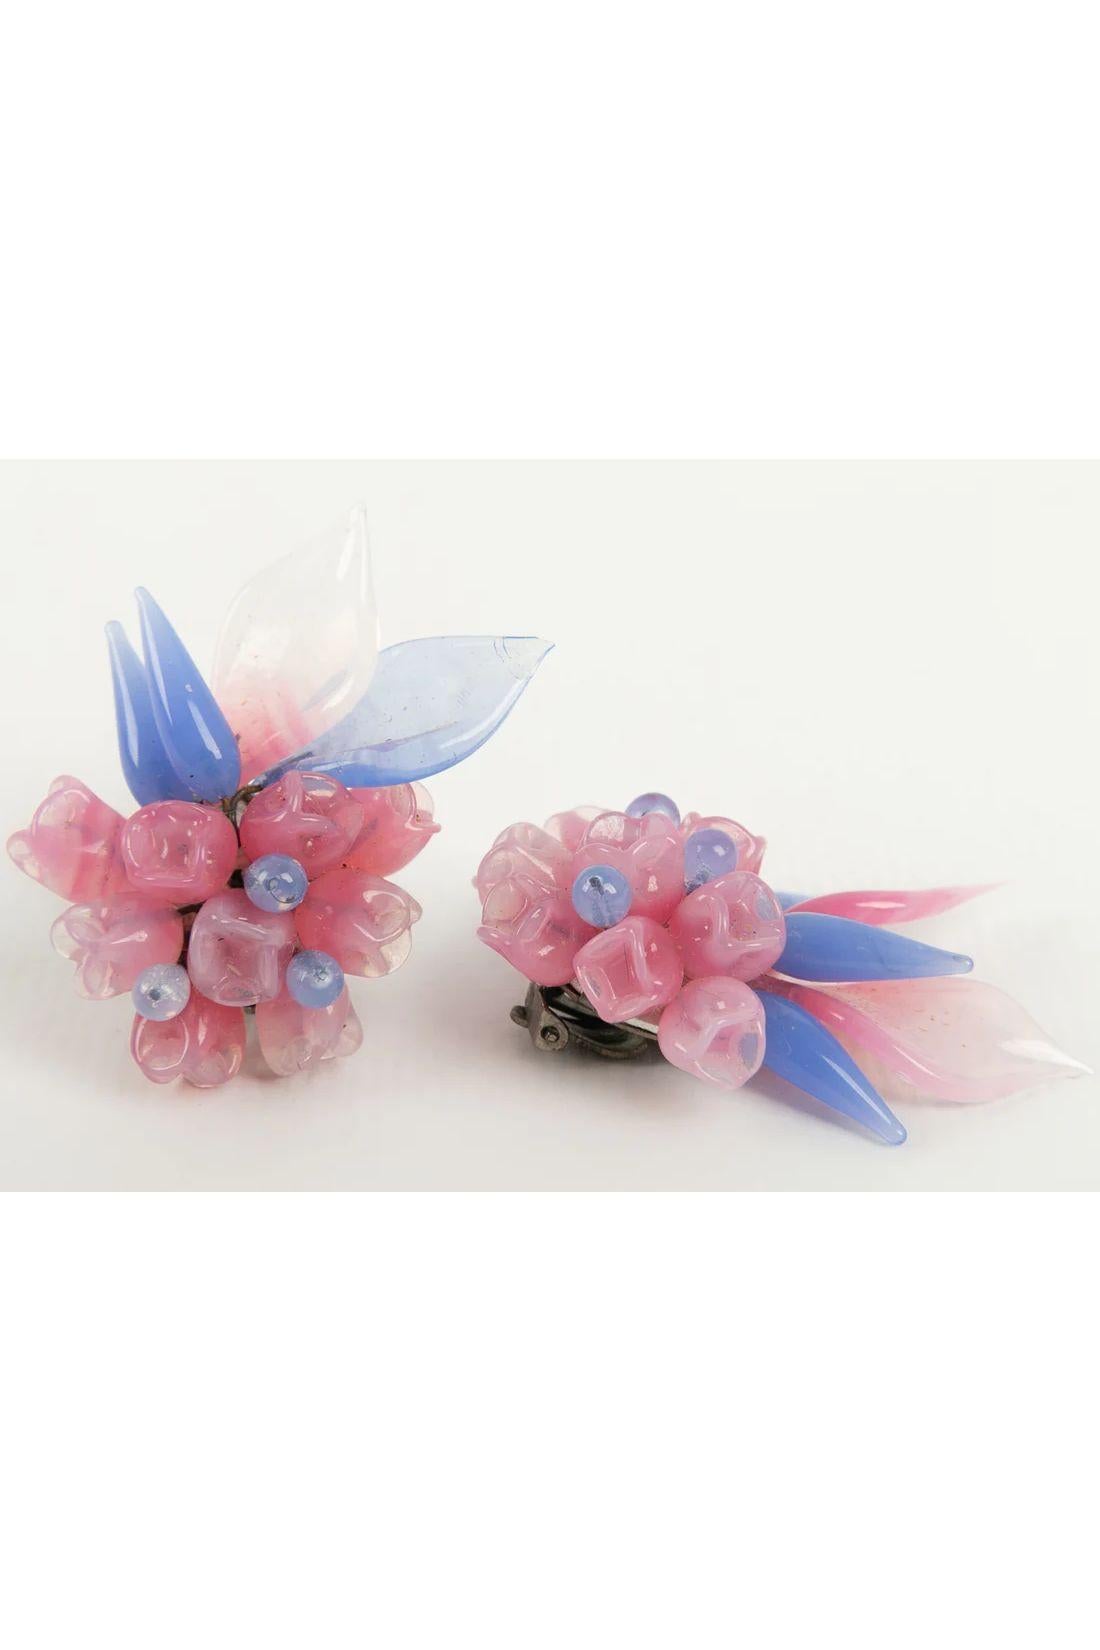 Rousselet - Earrings in glass paste in shades of blue and pink. Work of the house Rousselet dating from the years 1950/1960.

Additional information:
Dimensions: 4 cm

Condition: 
Very good condition

Seller Ref number: BO115